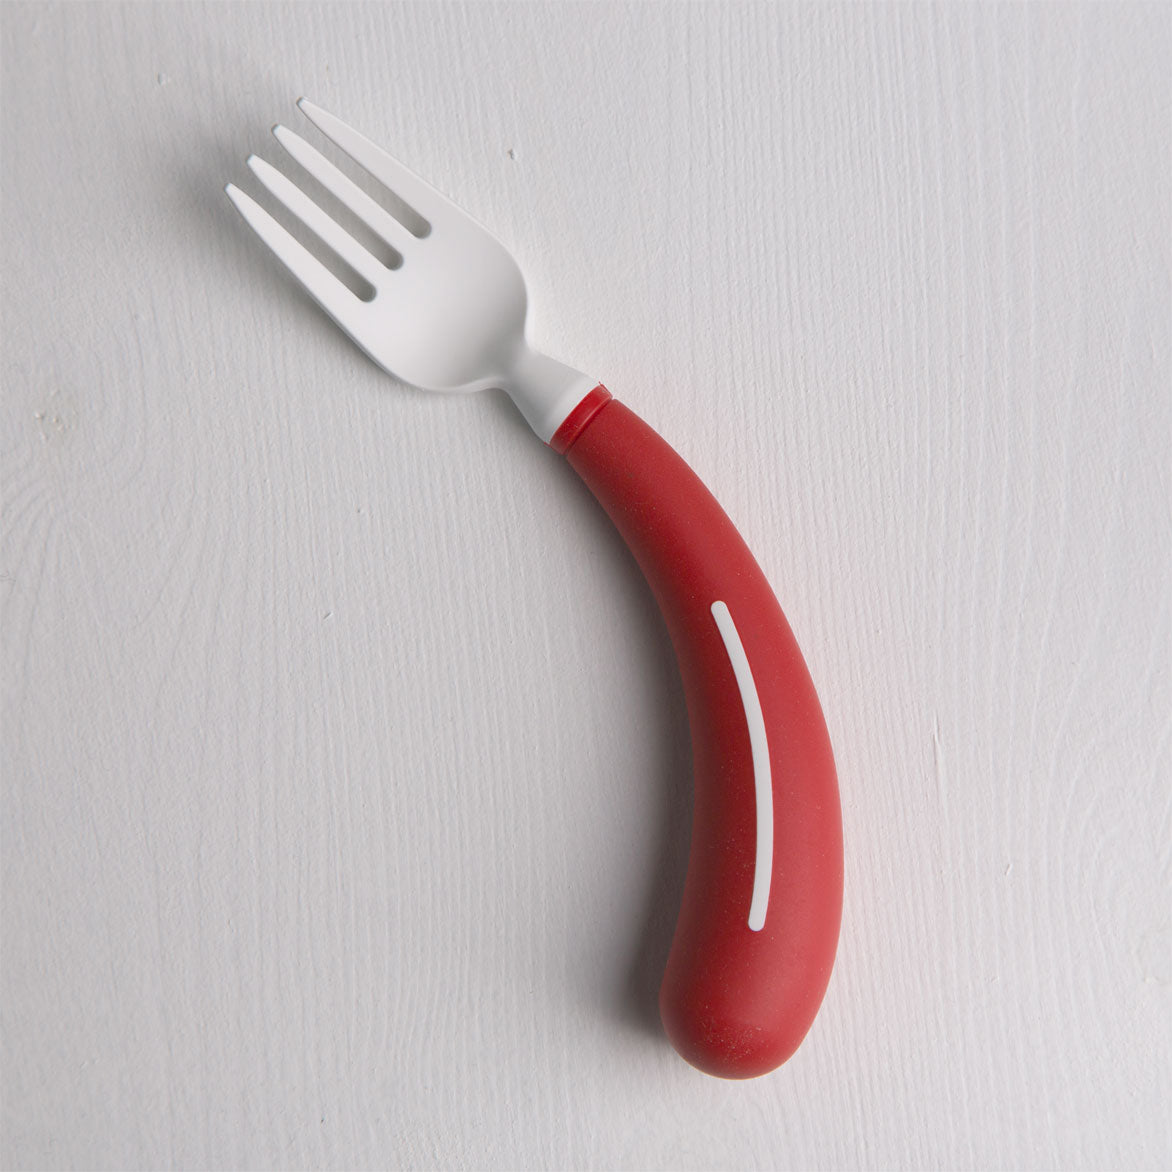 Henro-Grip Cutlery - red right fork